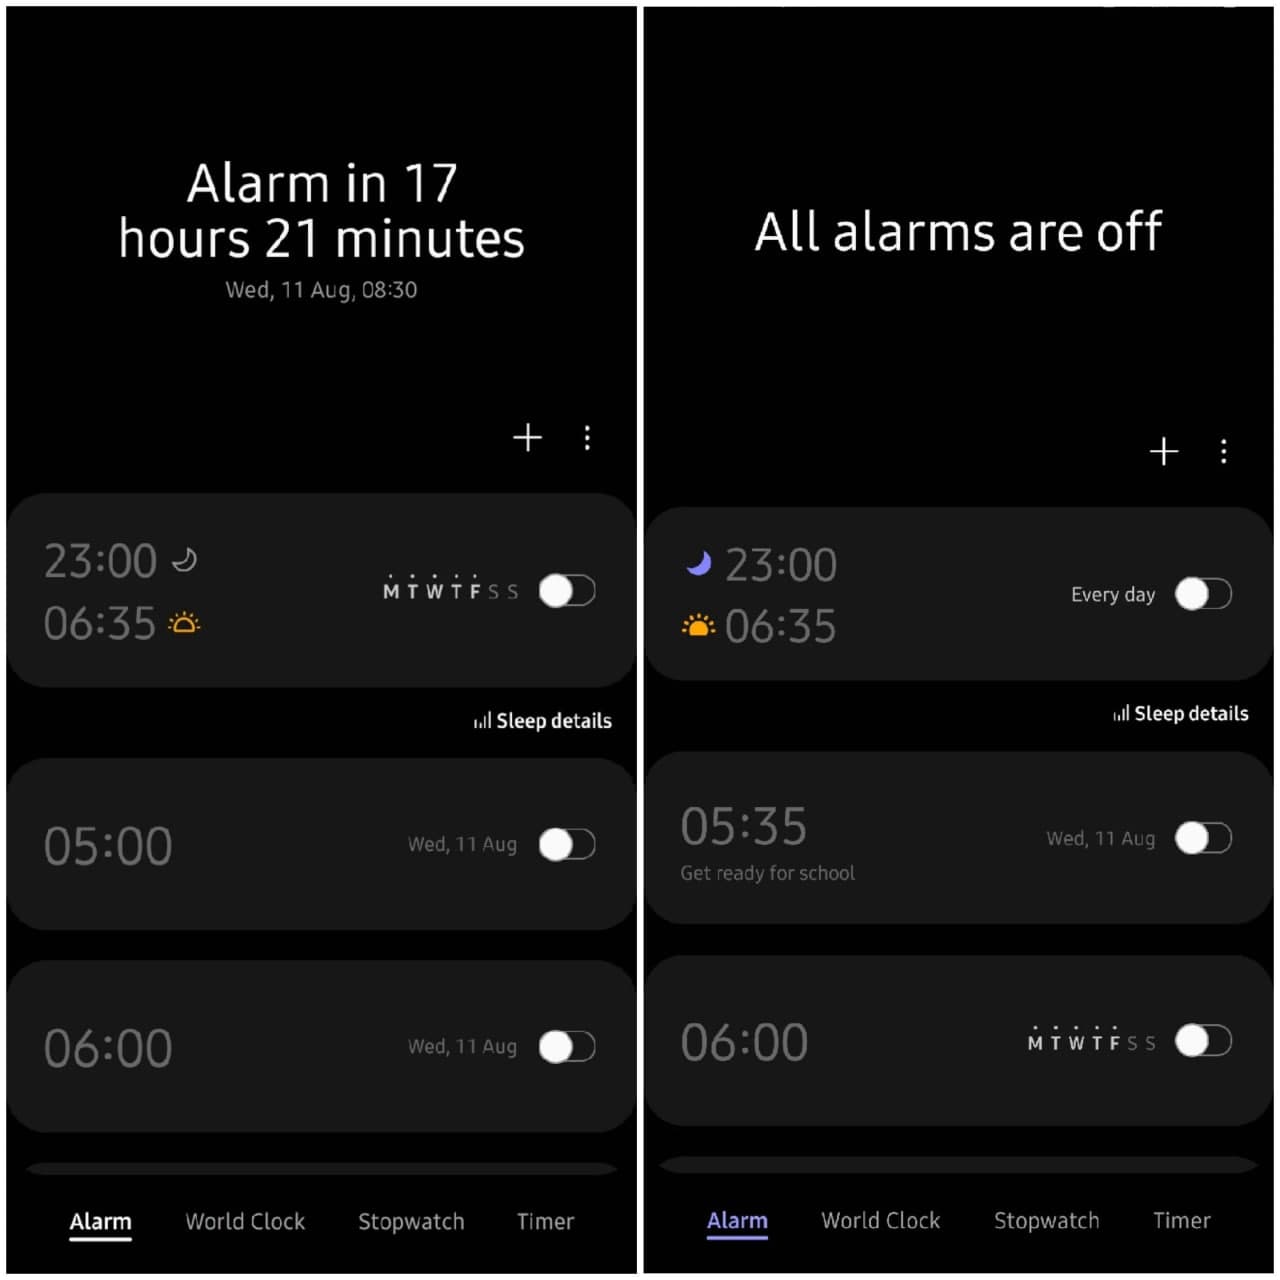 Samsung Clock Leaked One UI 3.1.1 Changes